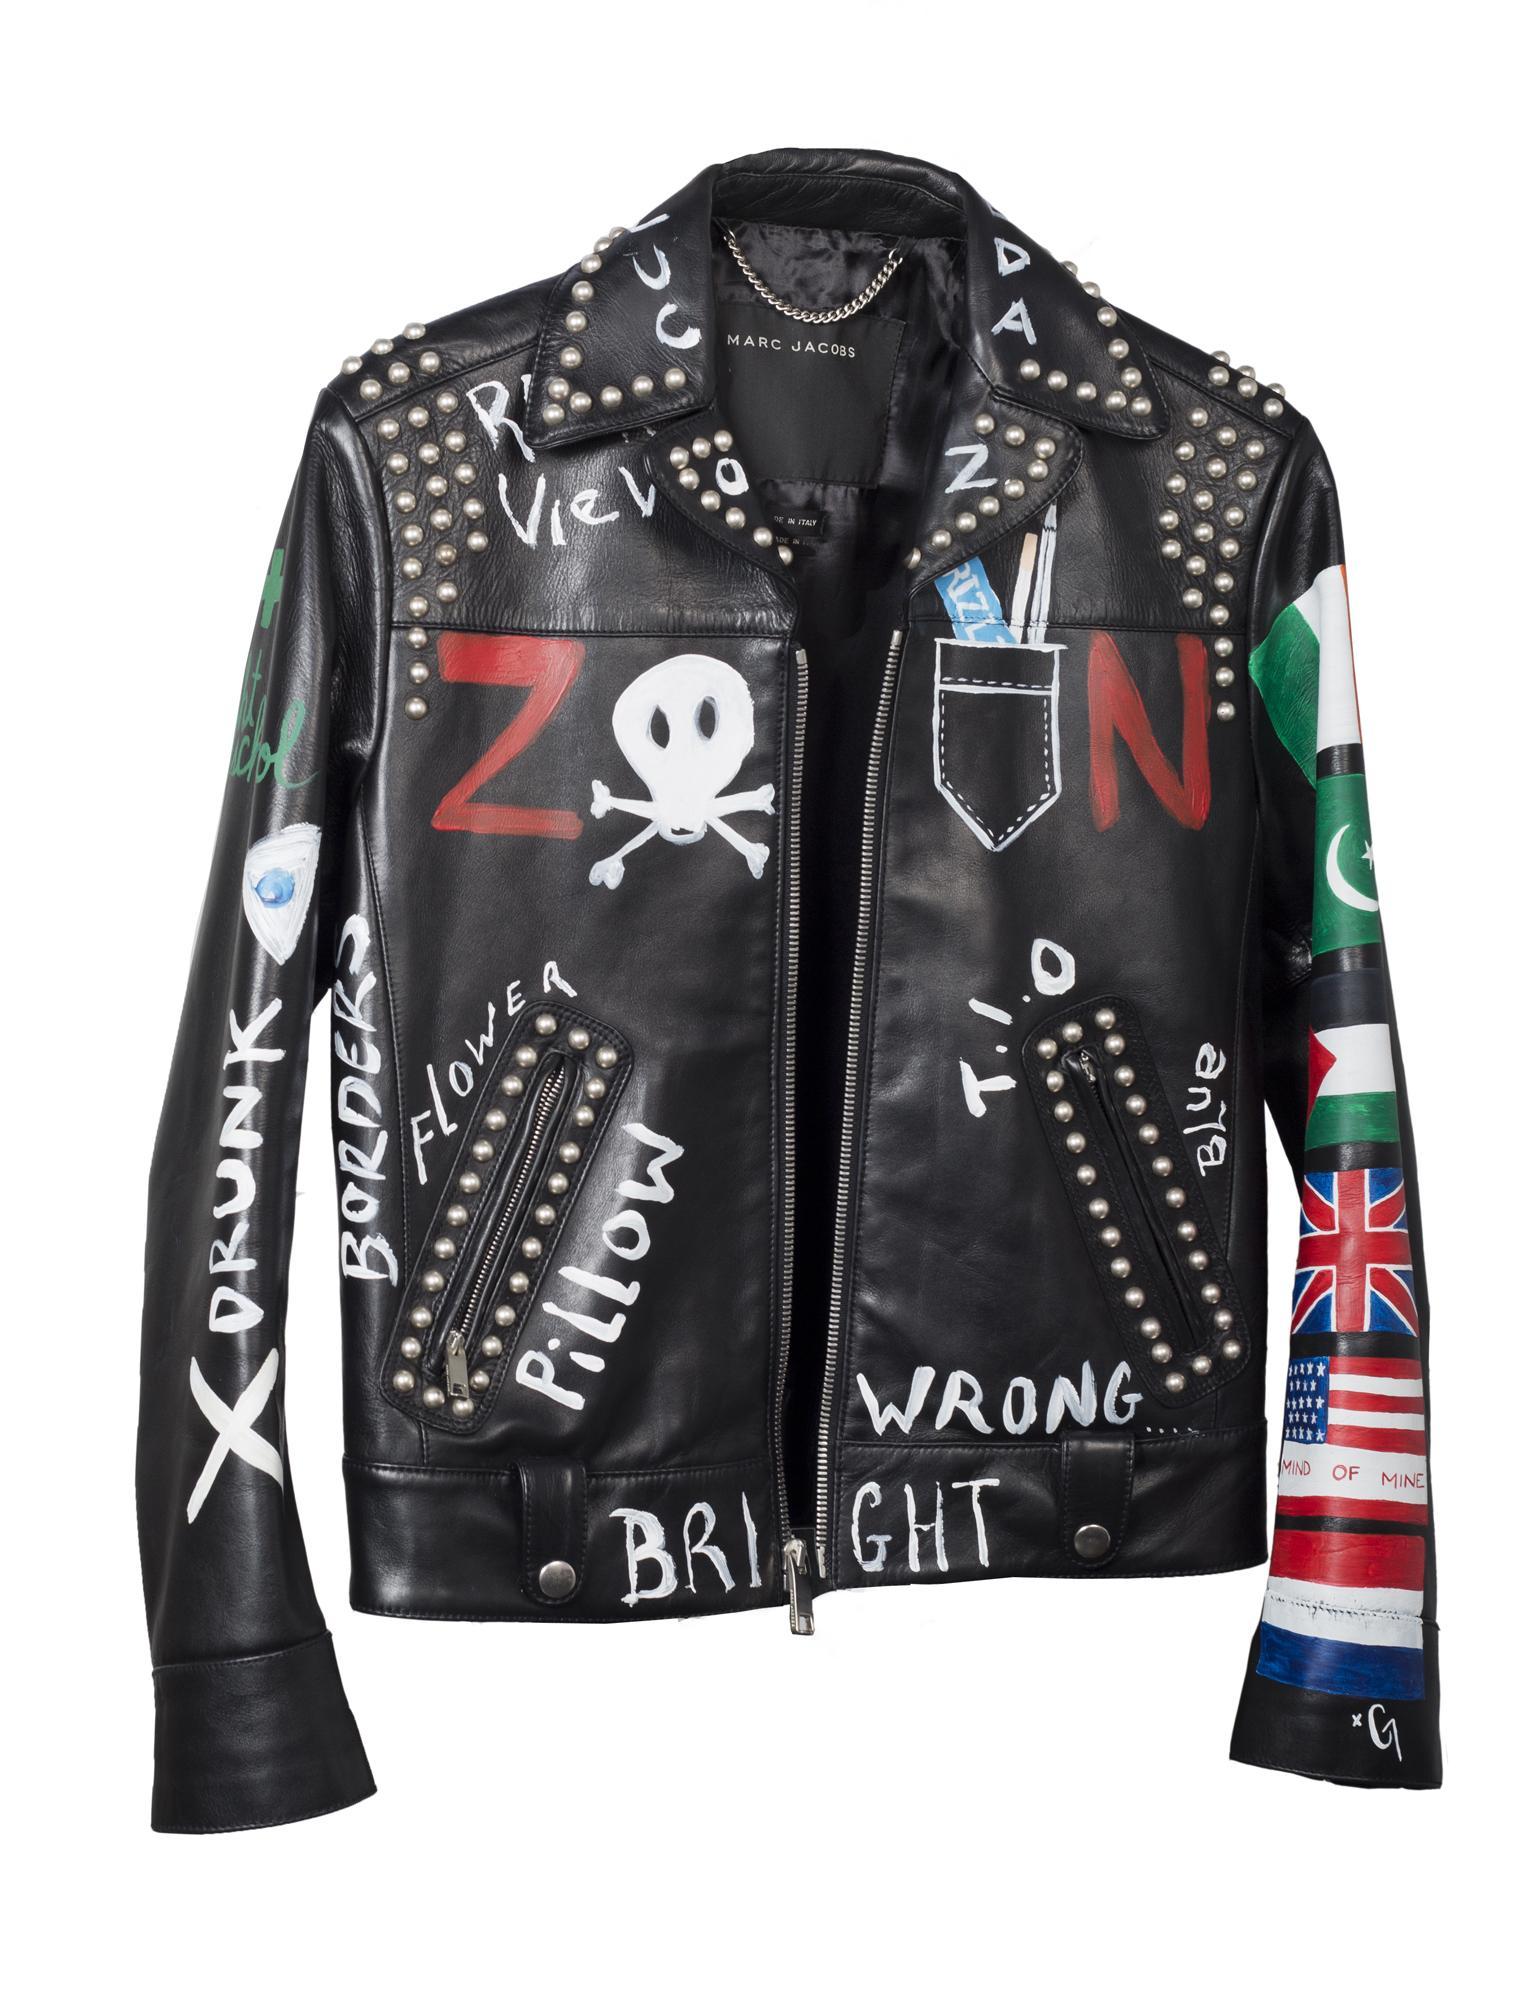 Zayn Malik’s leather jacket was donated into a prize draw hosted by Givergy